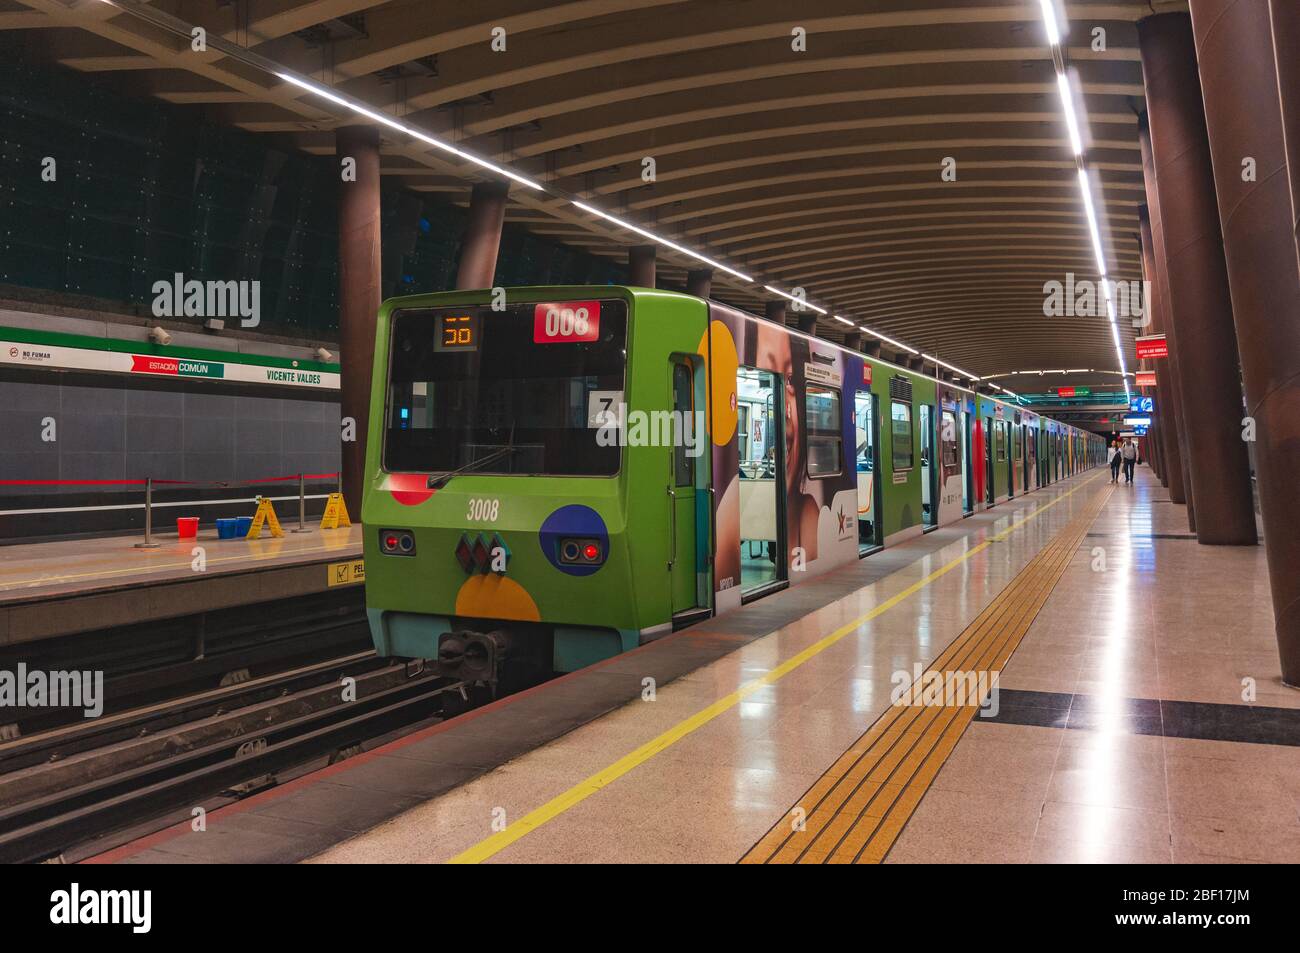 SANTIAGO, CHILE - MAY 2016: A Metro de Santiago train at a station of Line 5 Stock Photo